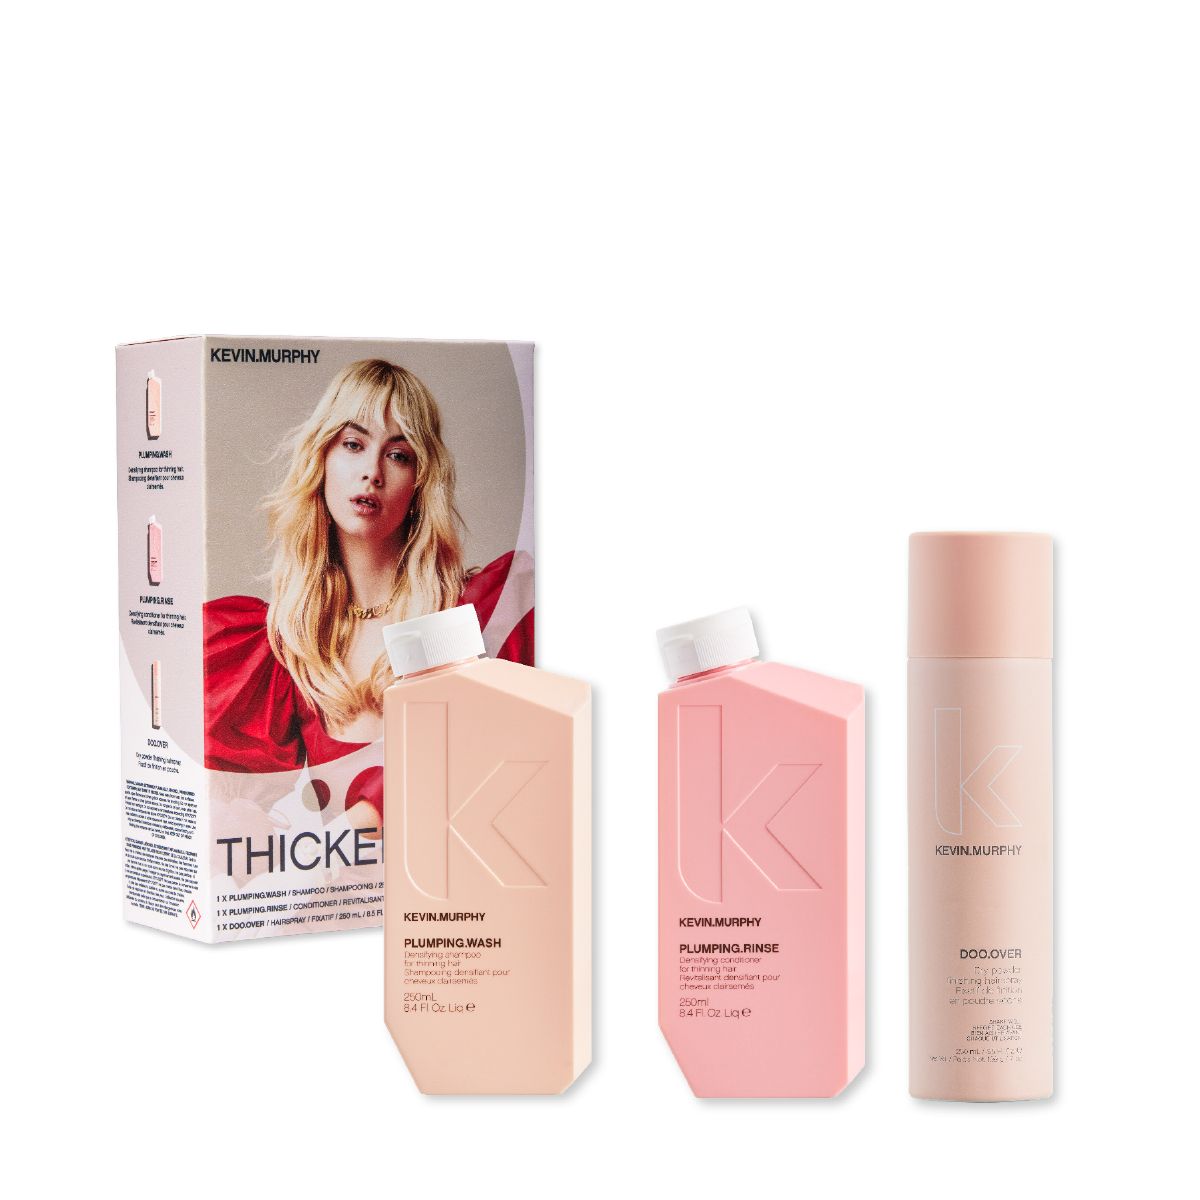 KEVIN.MURPHY THICKENING – PLUMPING